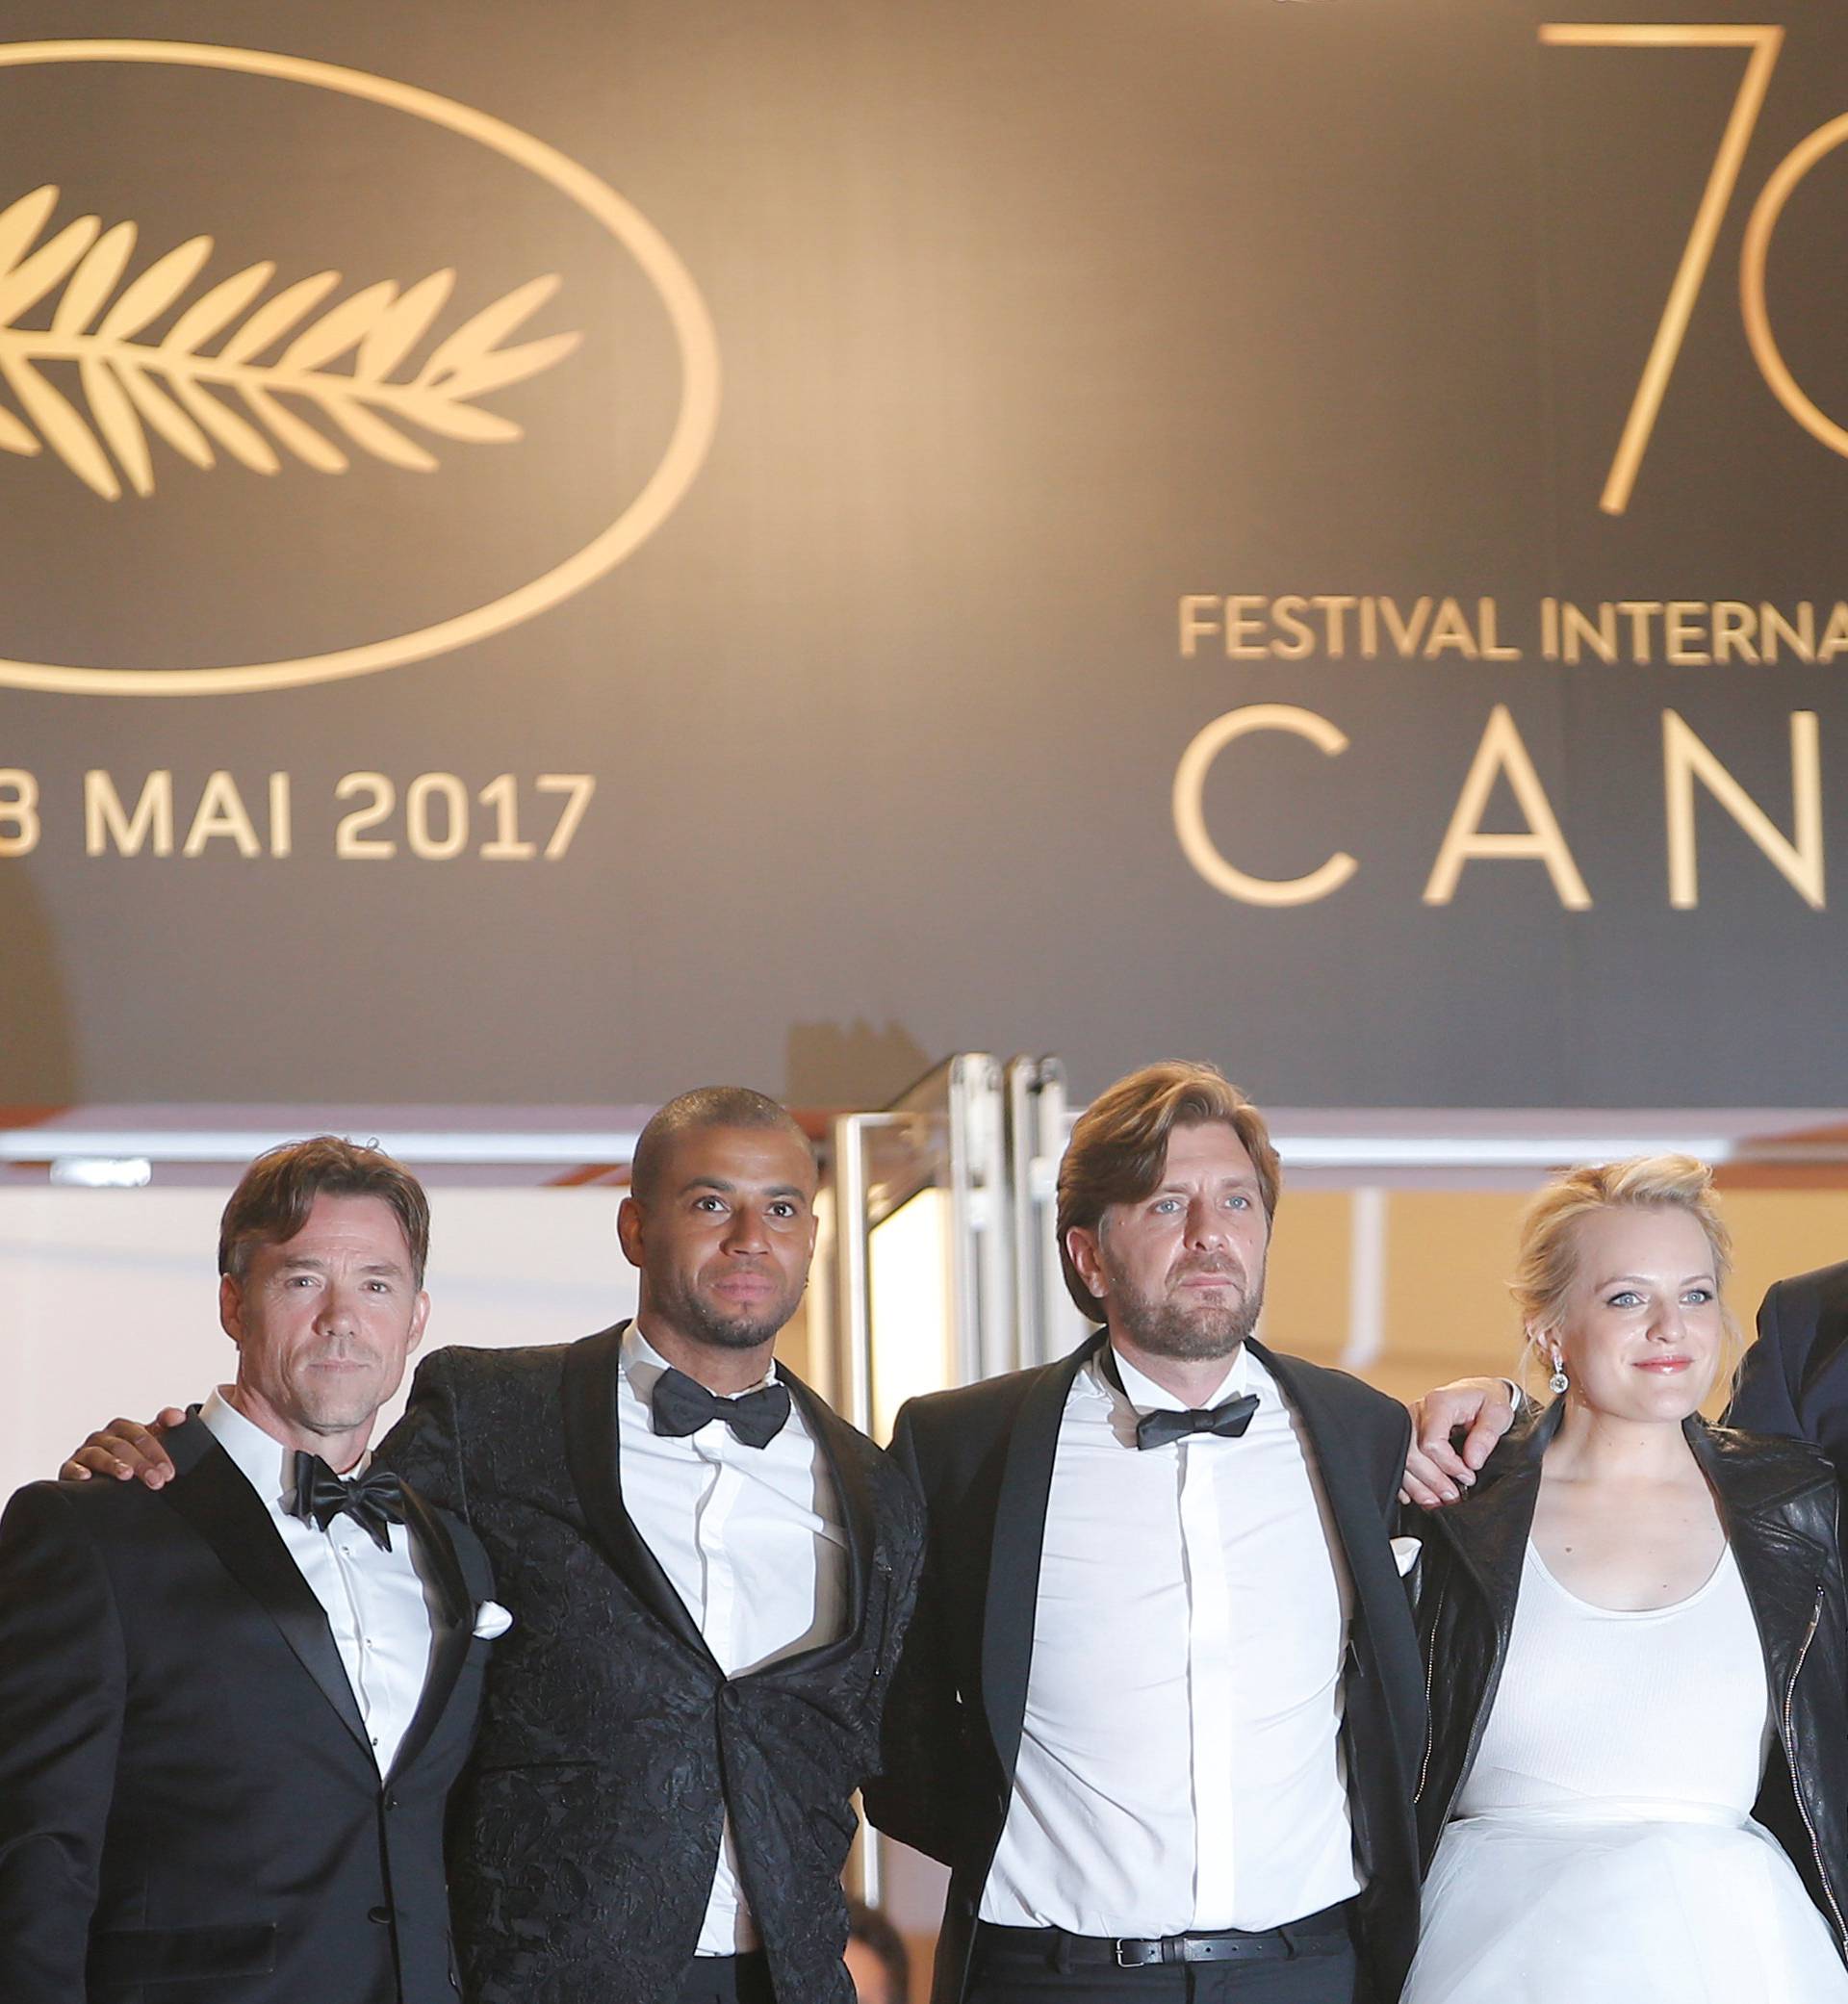 70th Cannes Film Festival - Screening of the film The Square in competition - Red Carpet Arrivals